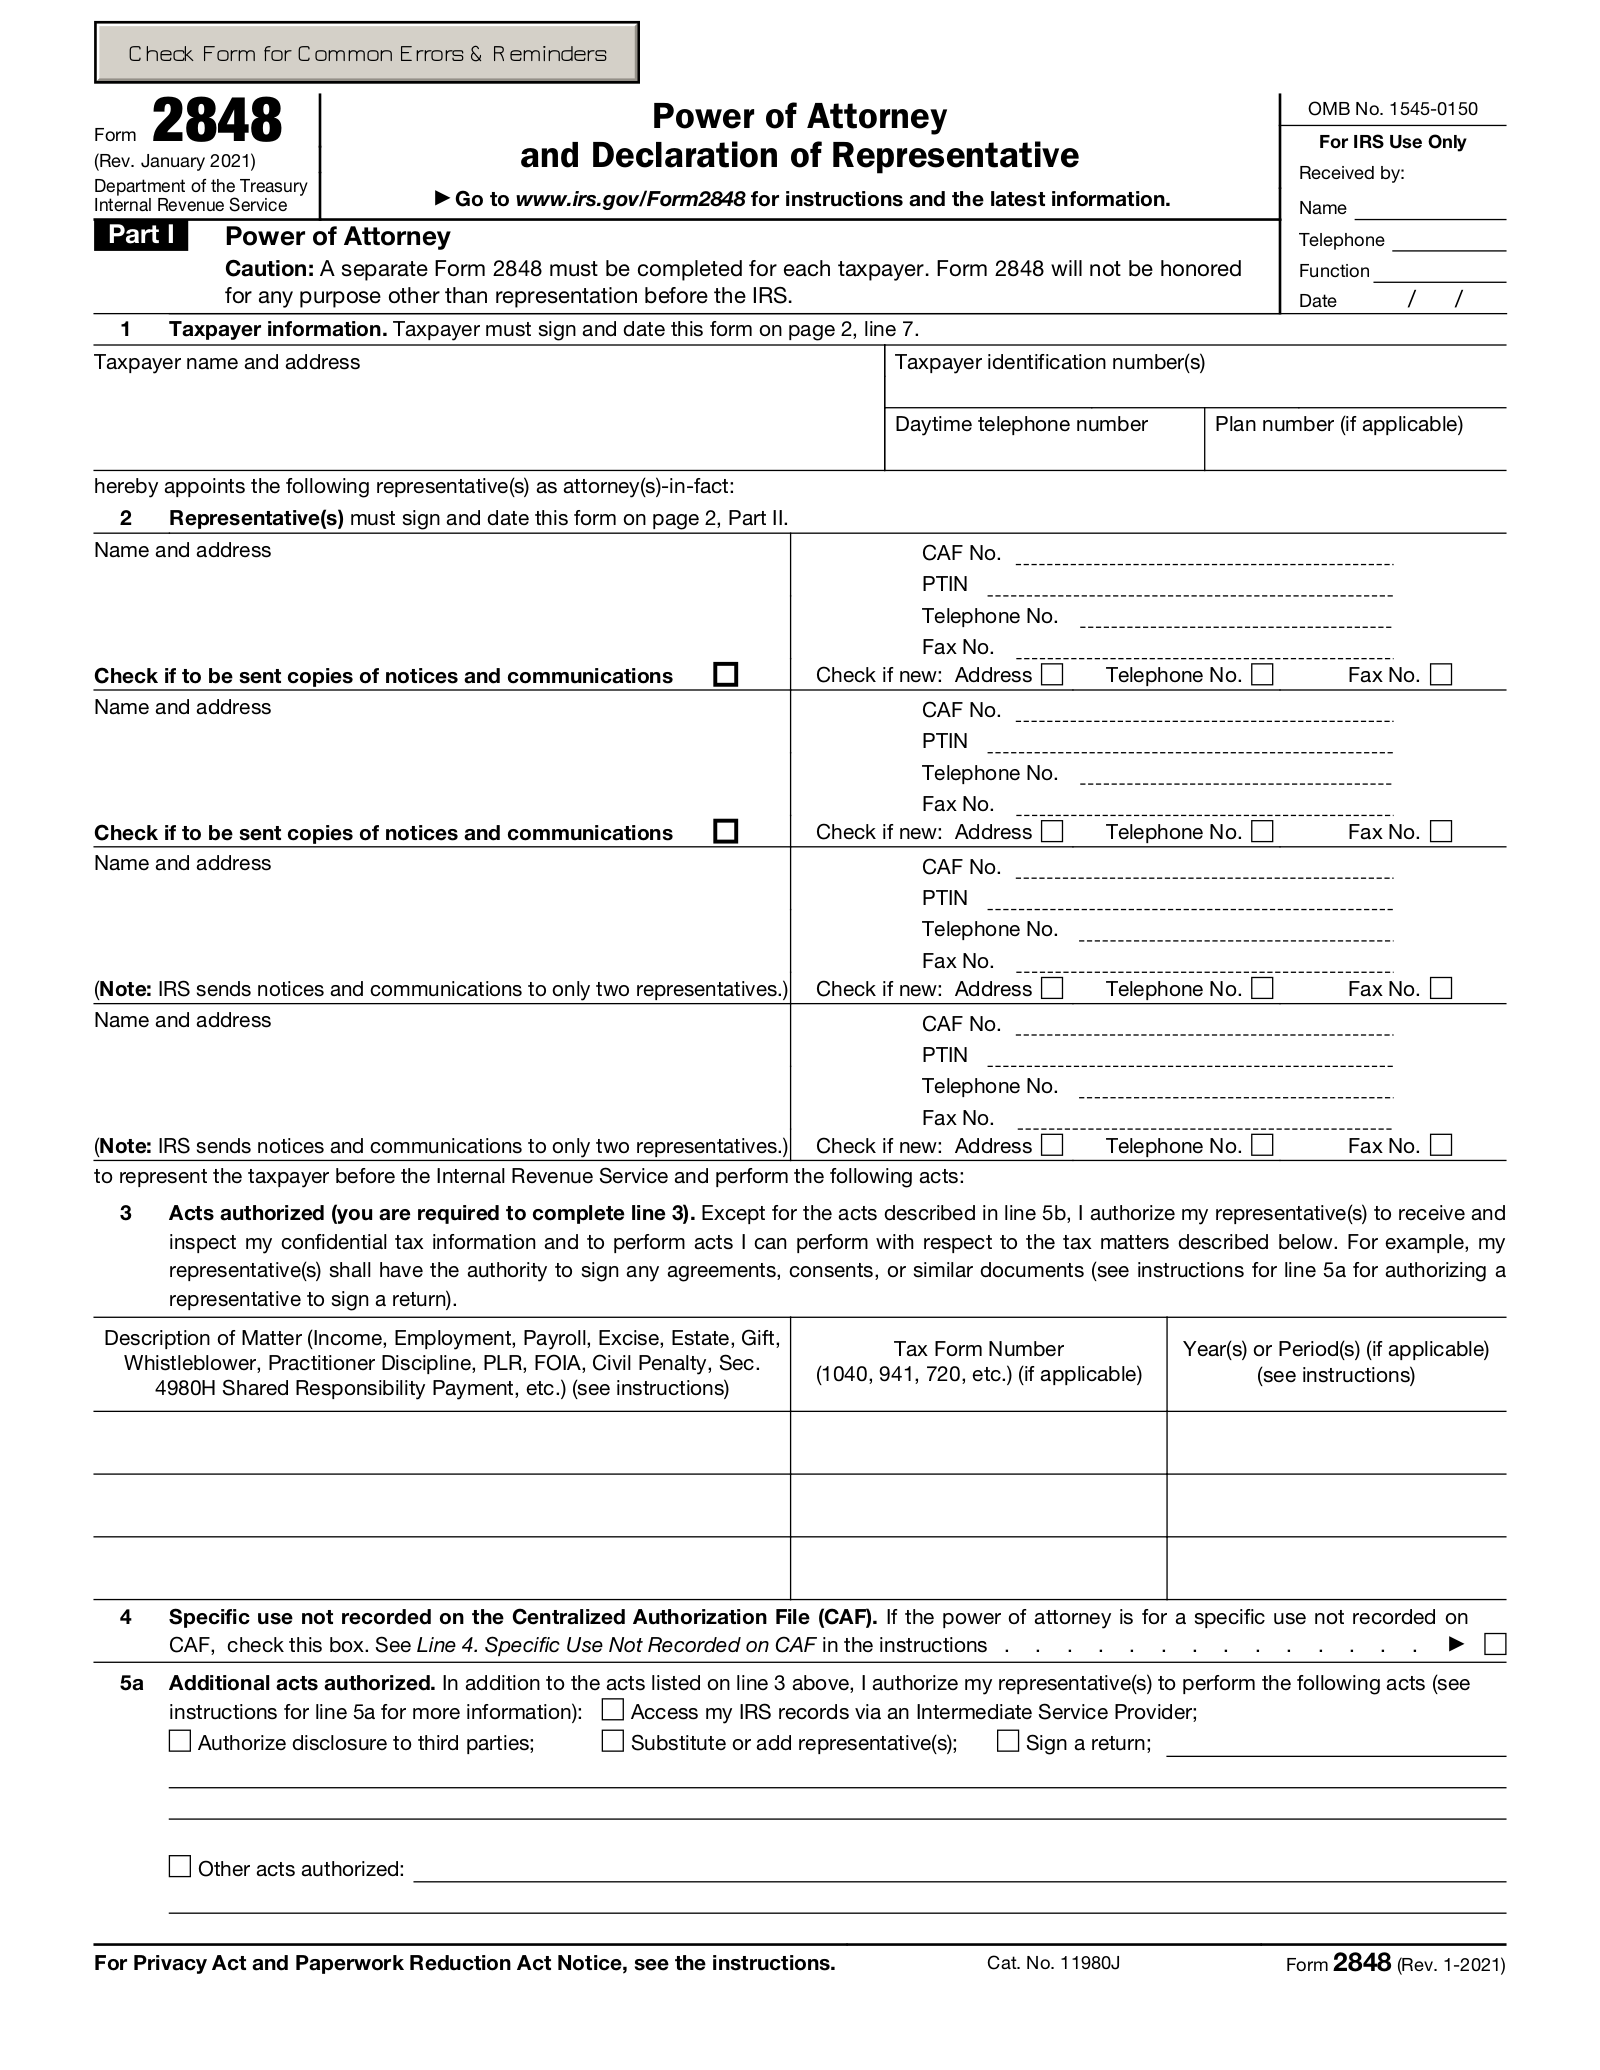 Free IRS Power Of Attorney Form 2848 Revised Jan 2018 